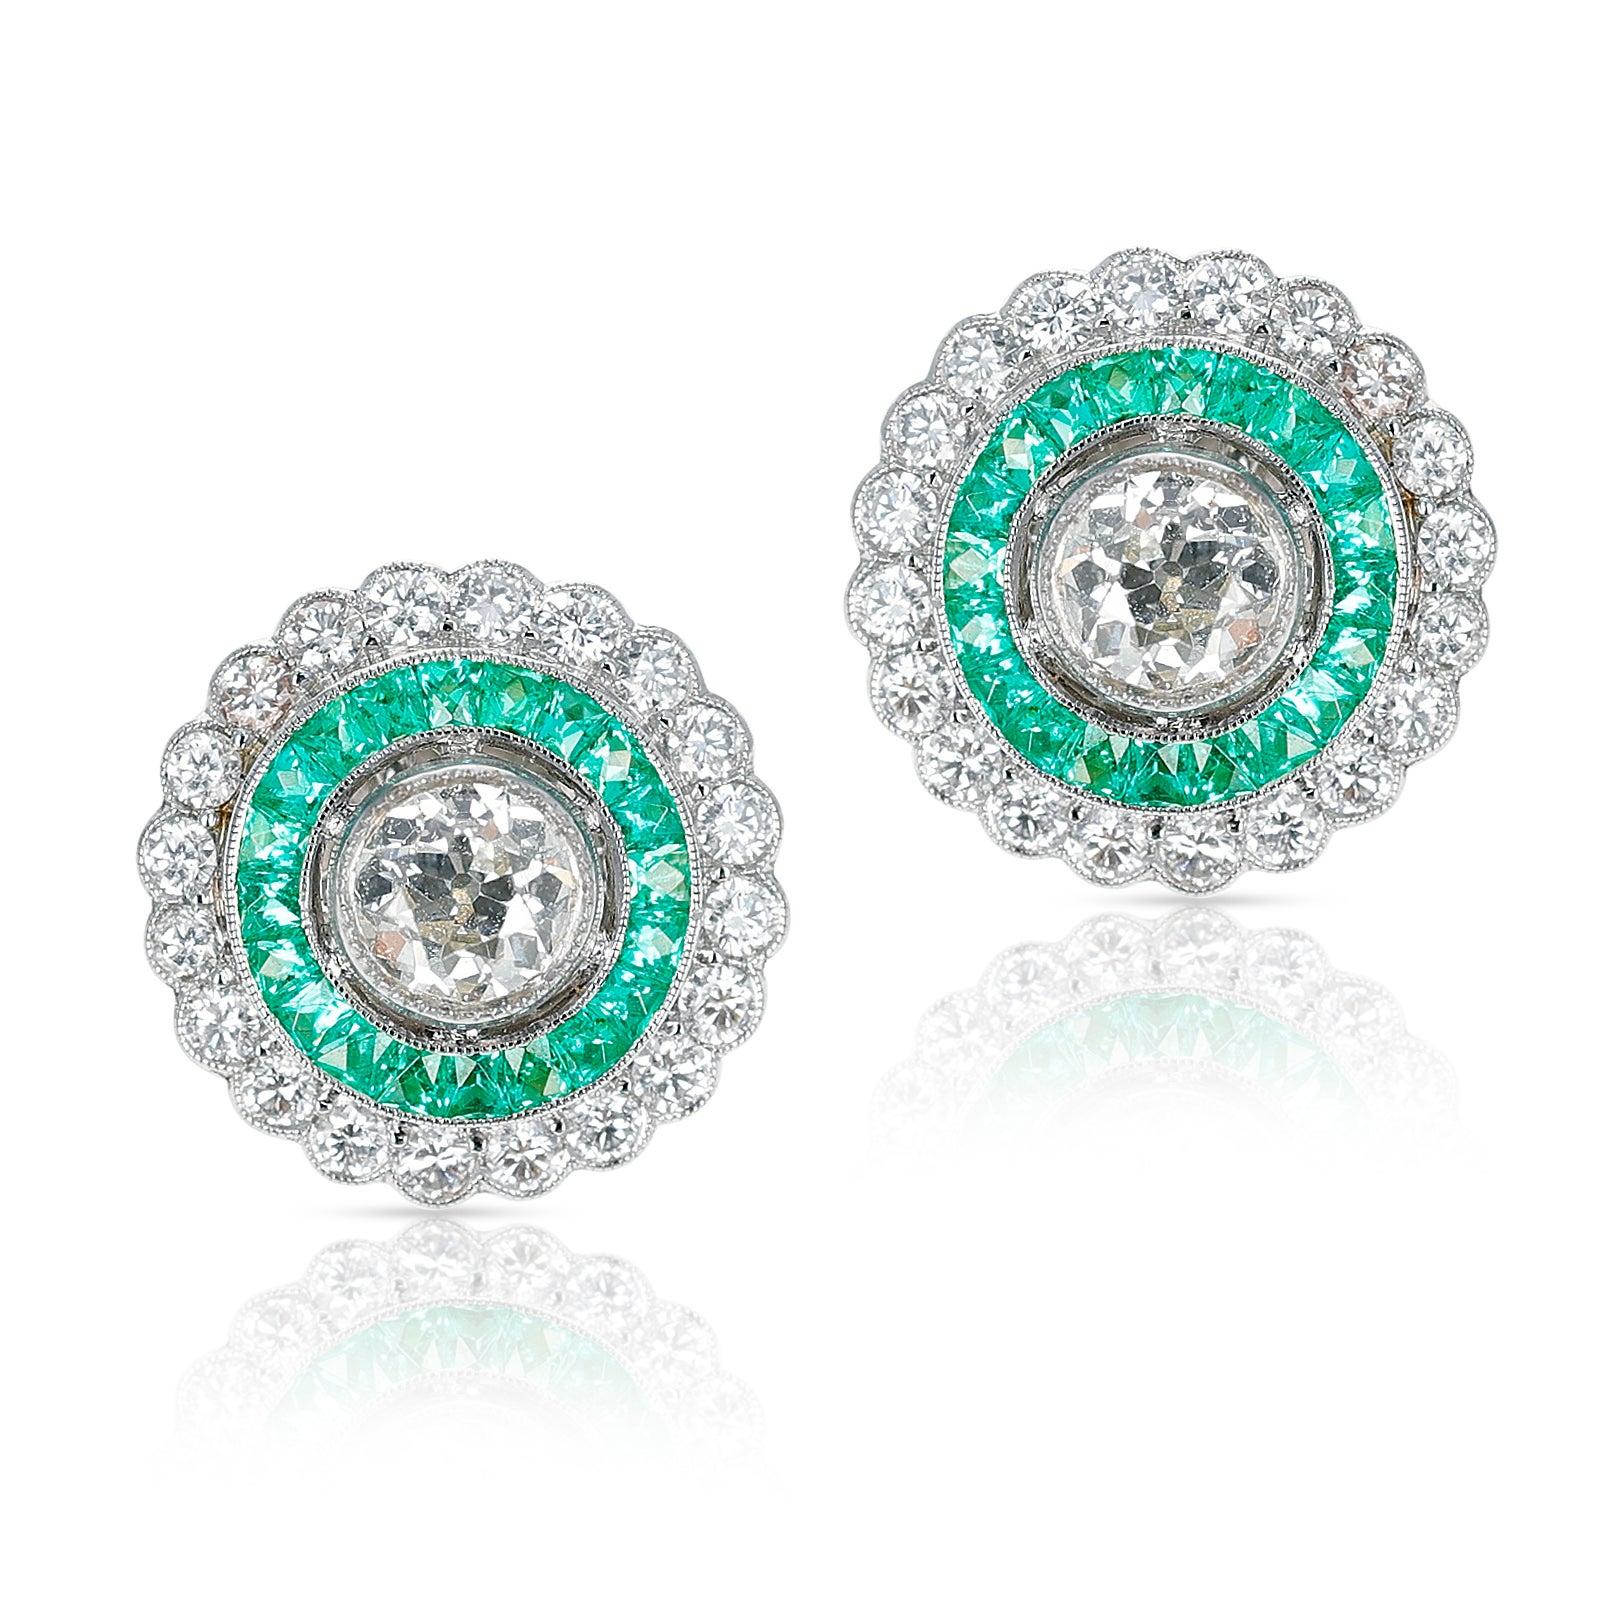 Art Deco Style 0.70 Ct. Each Diamond and Channel Set Emerald Earrings, Platinum In Excellent Condition For Sale In New York, NY